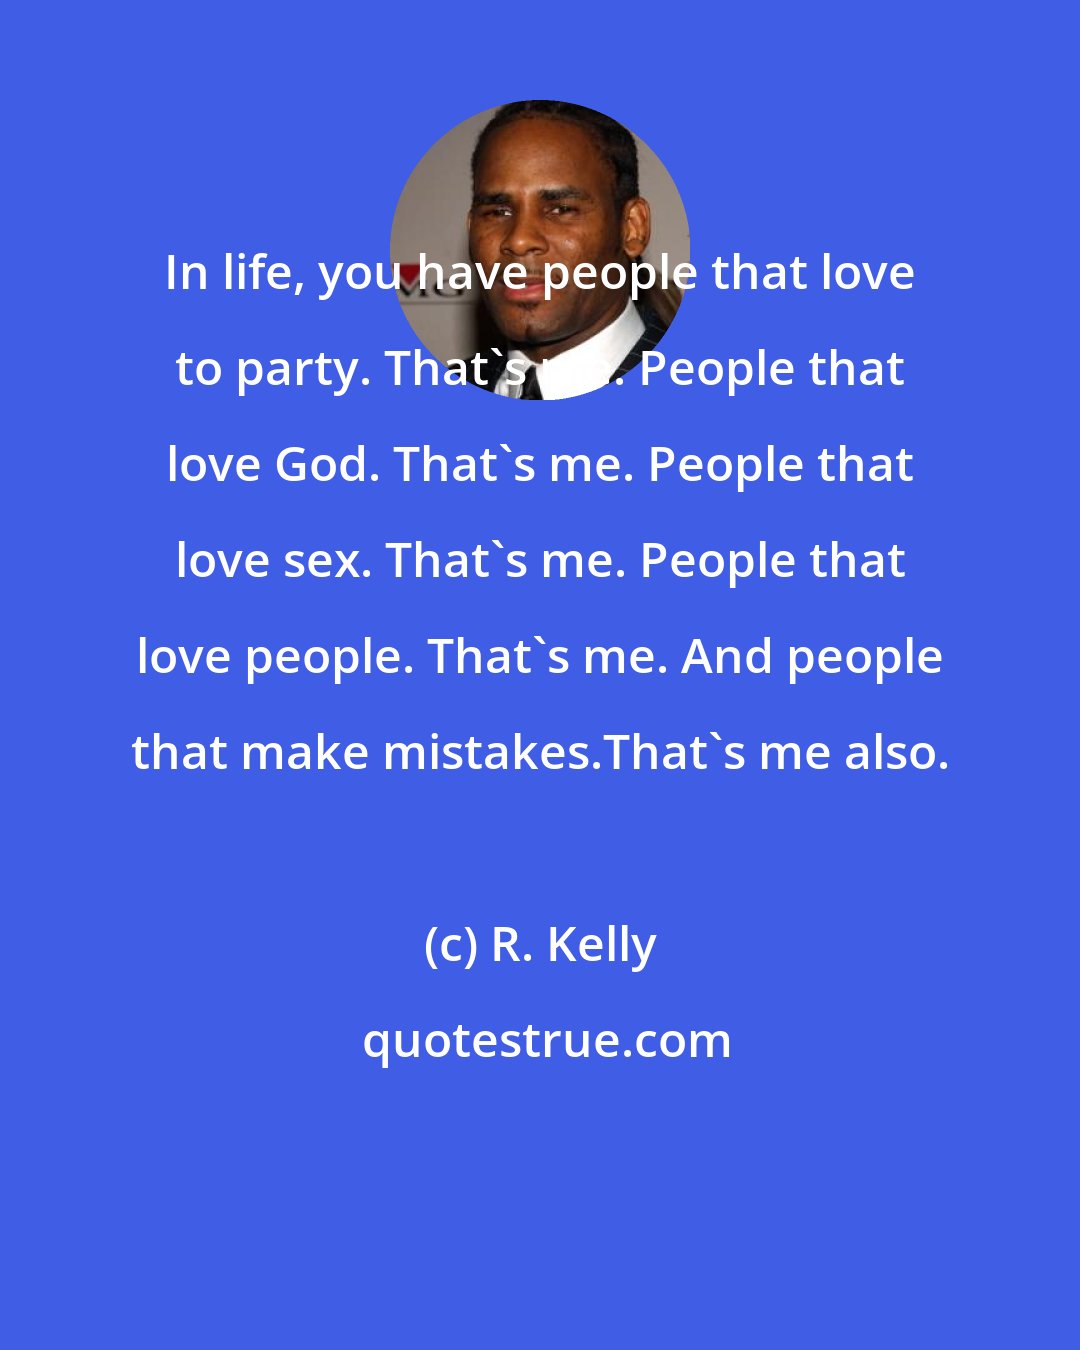 R. Kelly: In life, you have people that love to party. That's me. People that love God. That's me. People that love sex. That's me. People that love people. That's me. And people that make mistakes.That's me also.